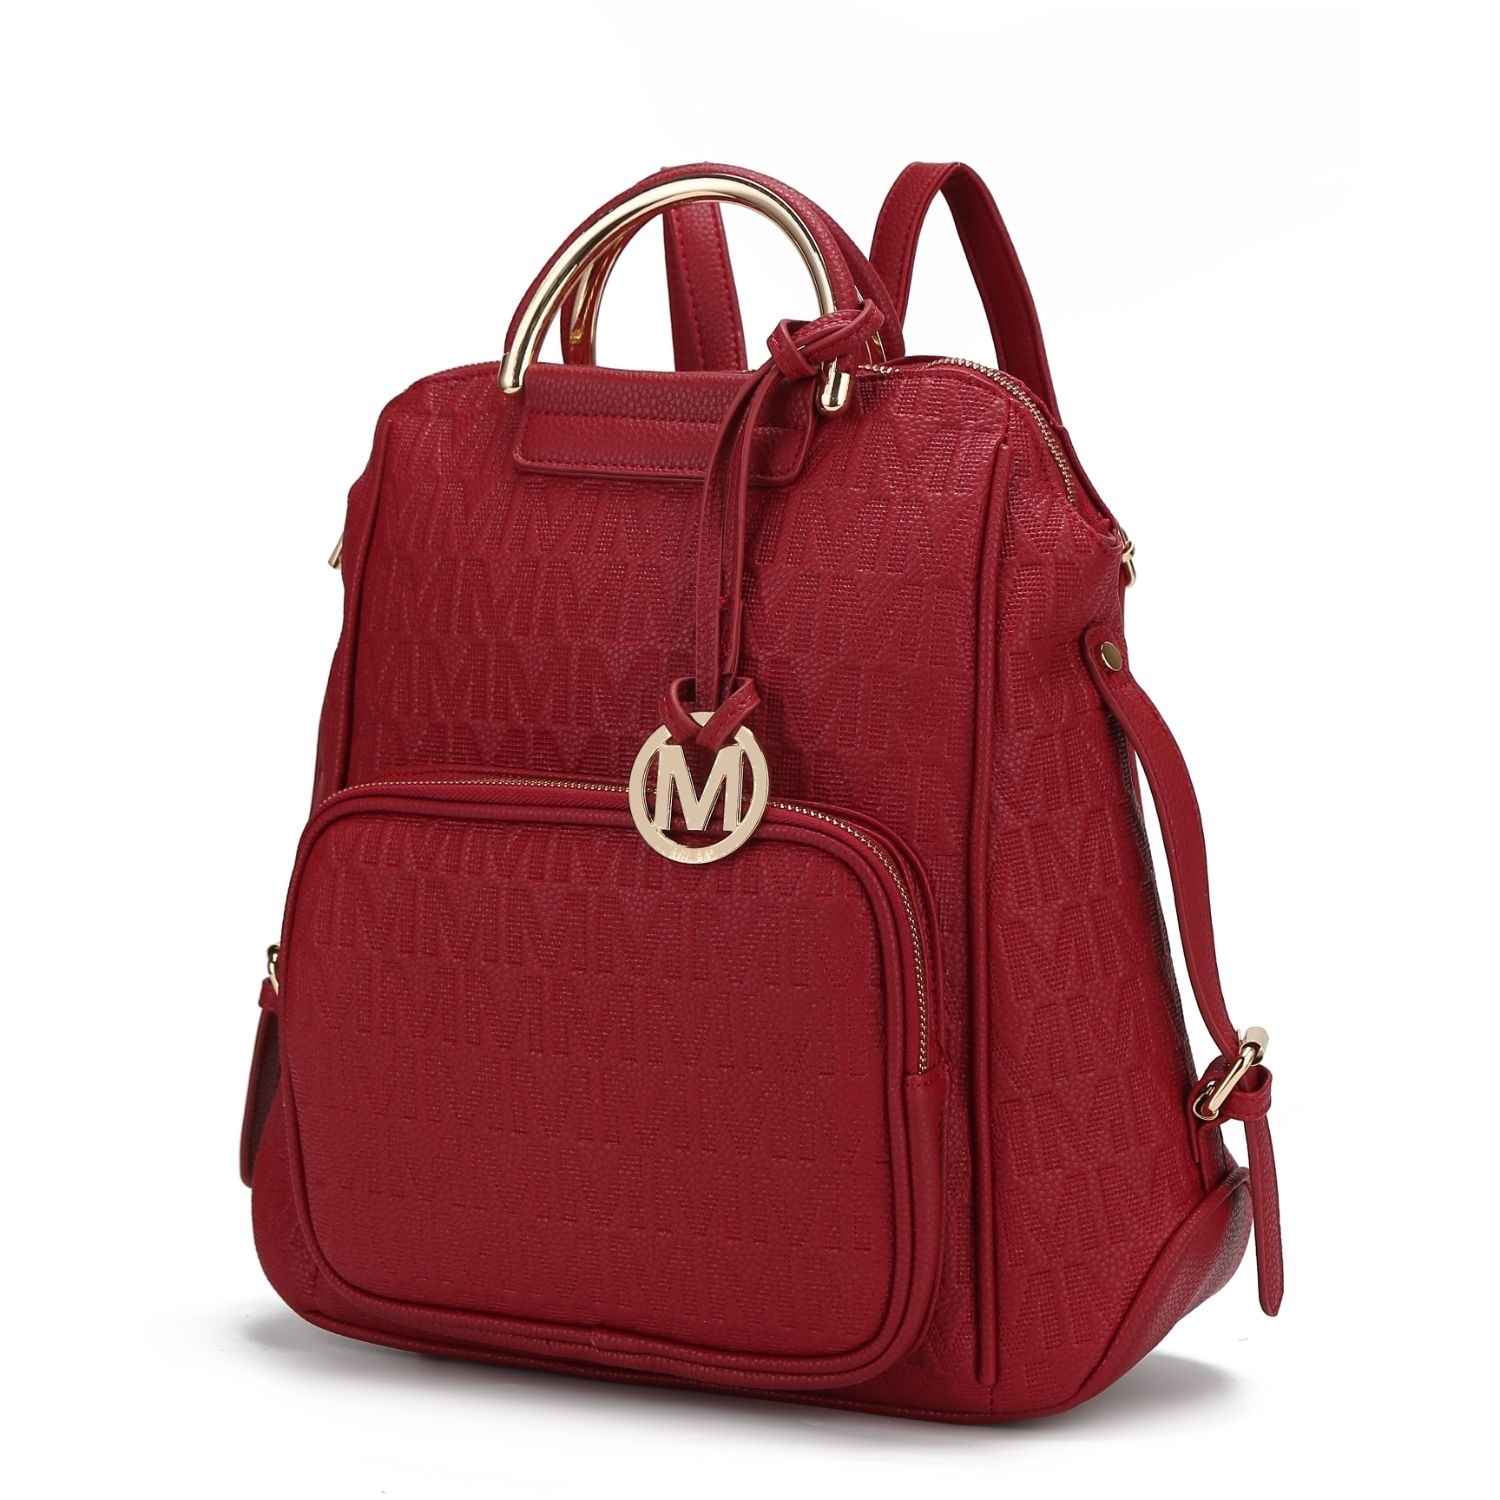 MKF Collection Torra Milan .M. Signature Trendy Backpack By Mia K. - Red